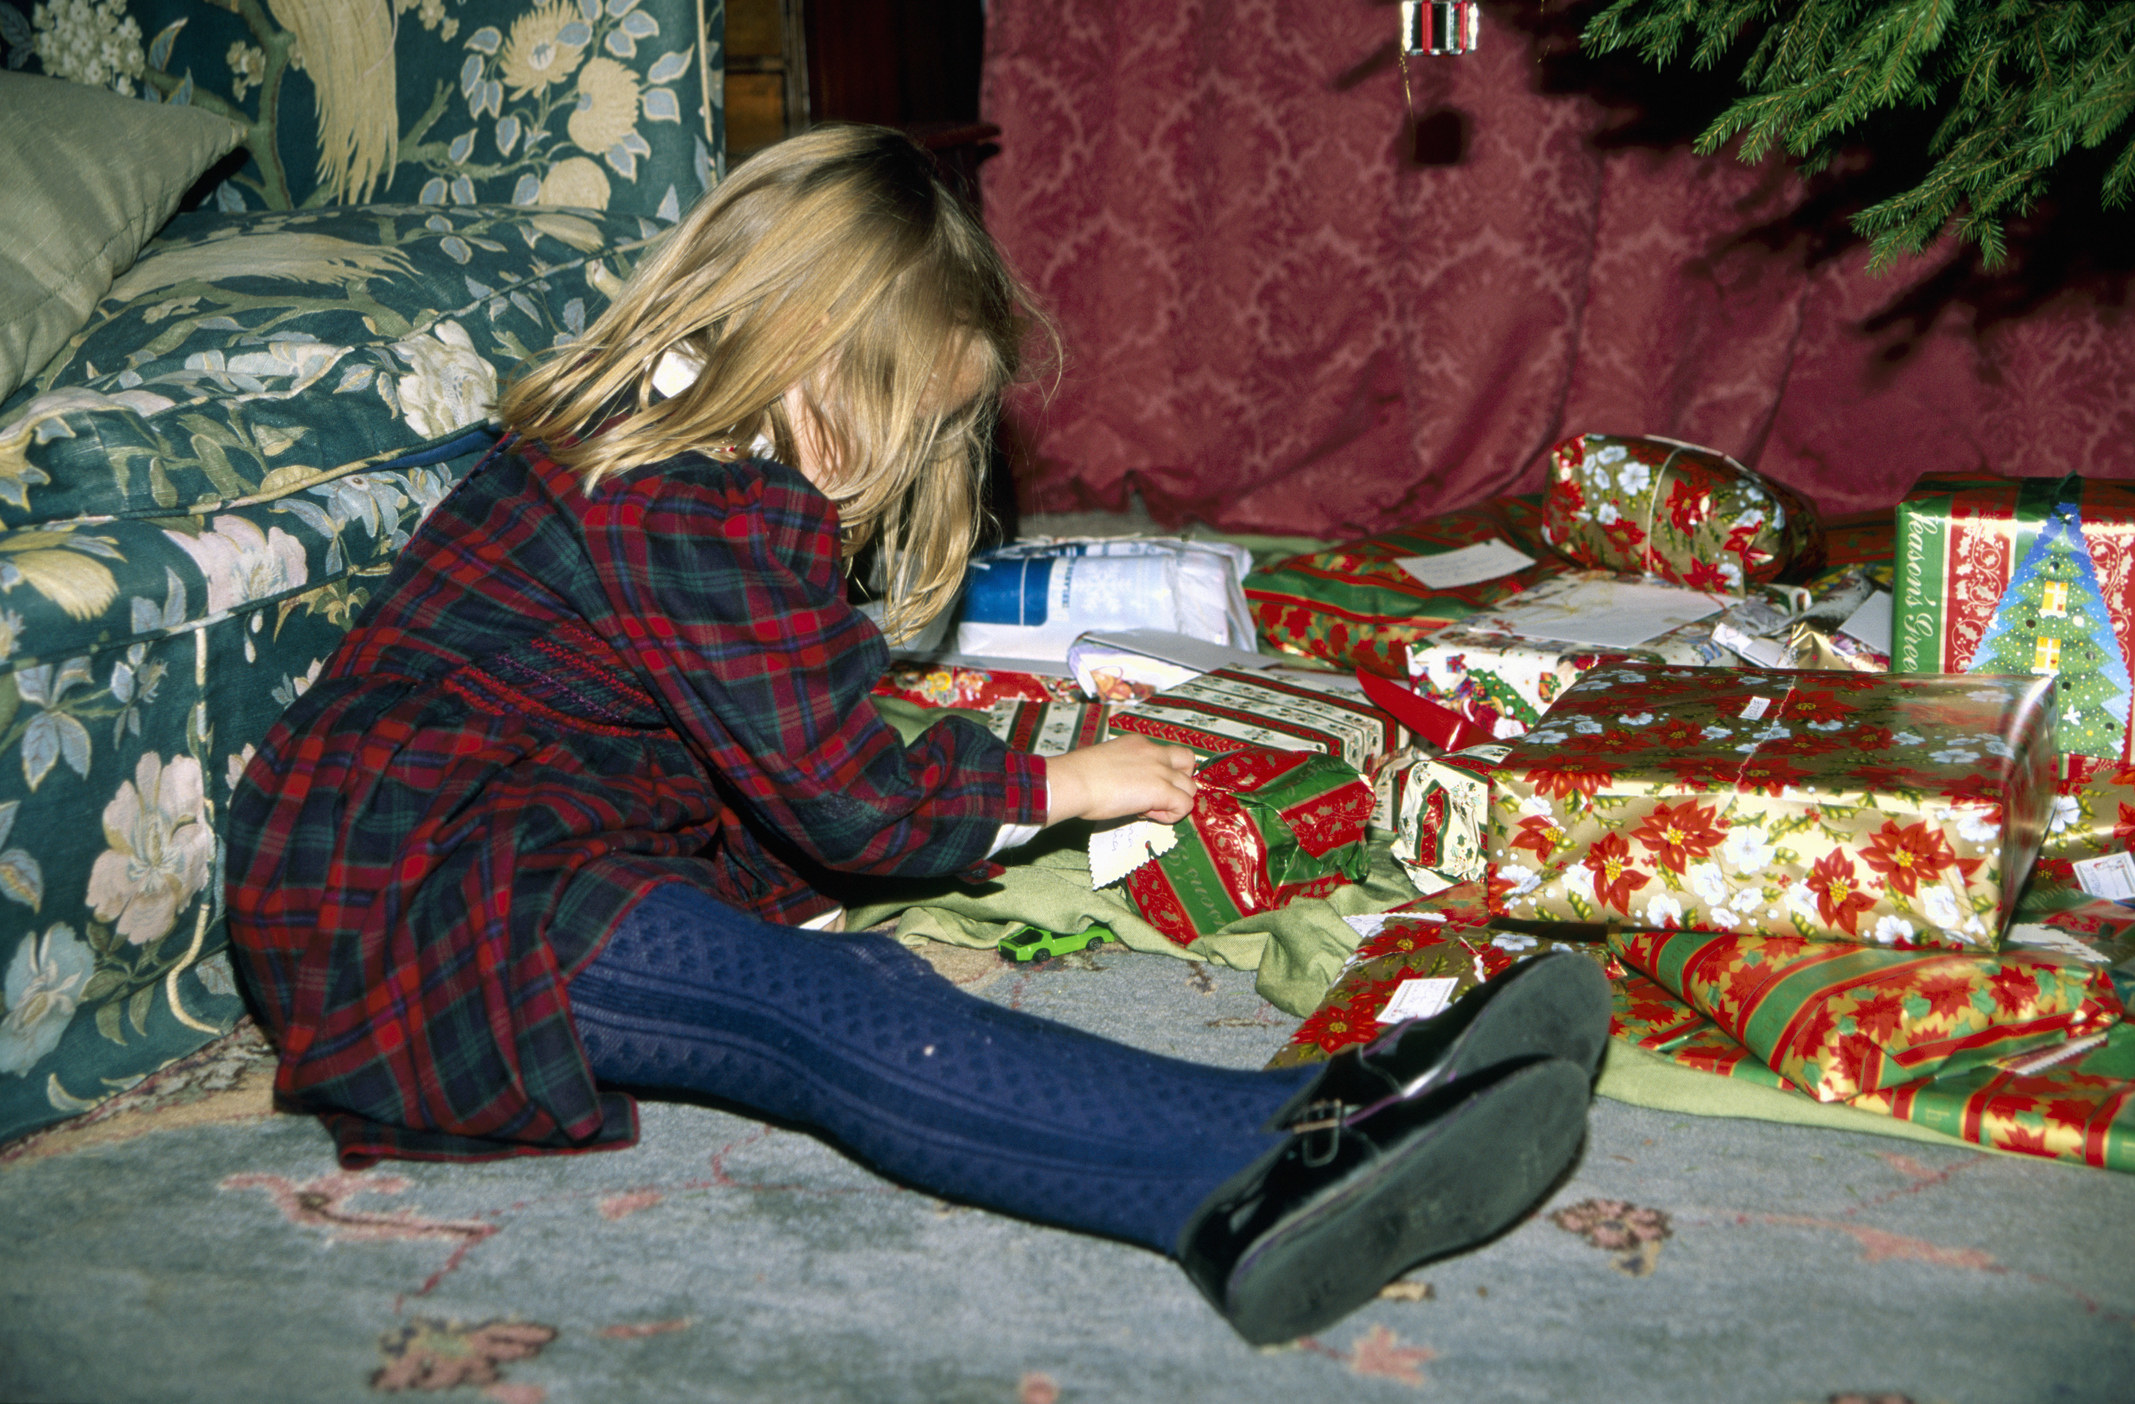 A little girl opening presents